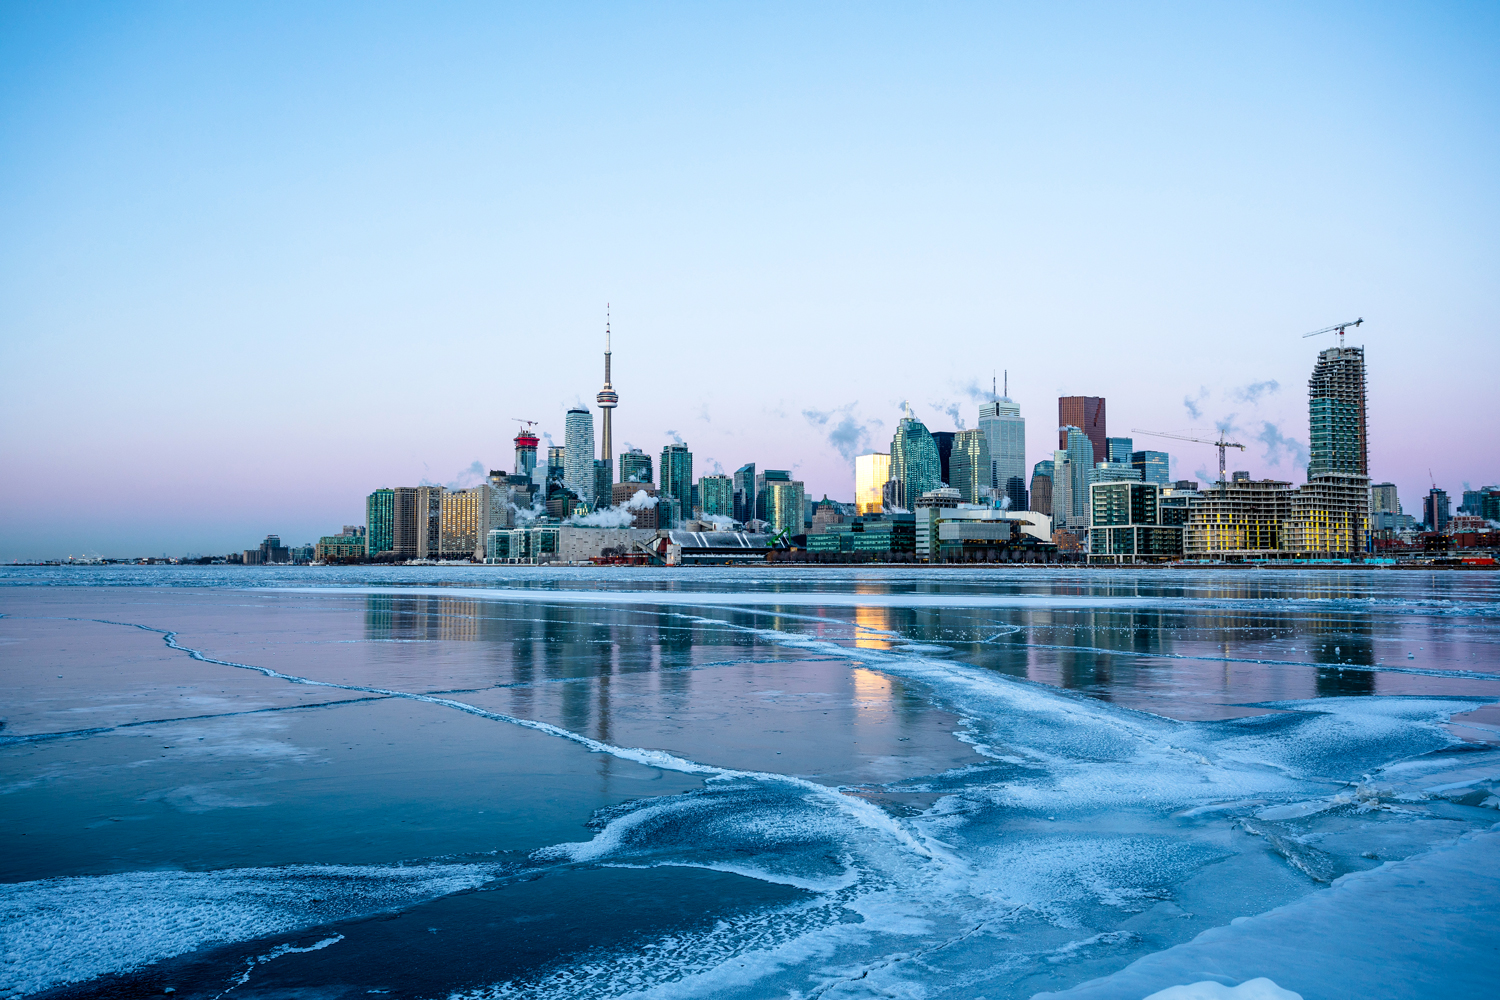 Why has it been so cold this winter in Toronto? U of T Scarborough